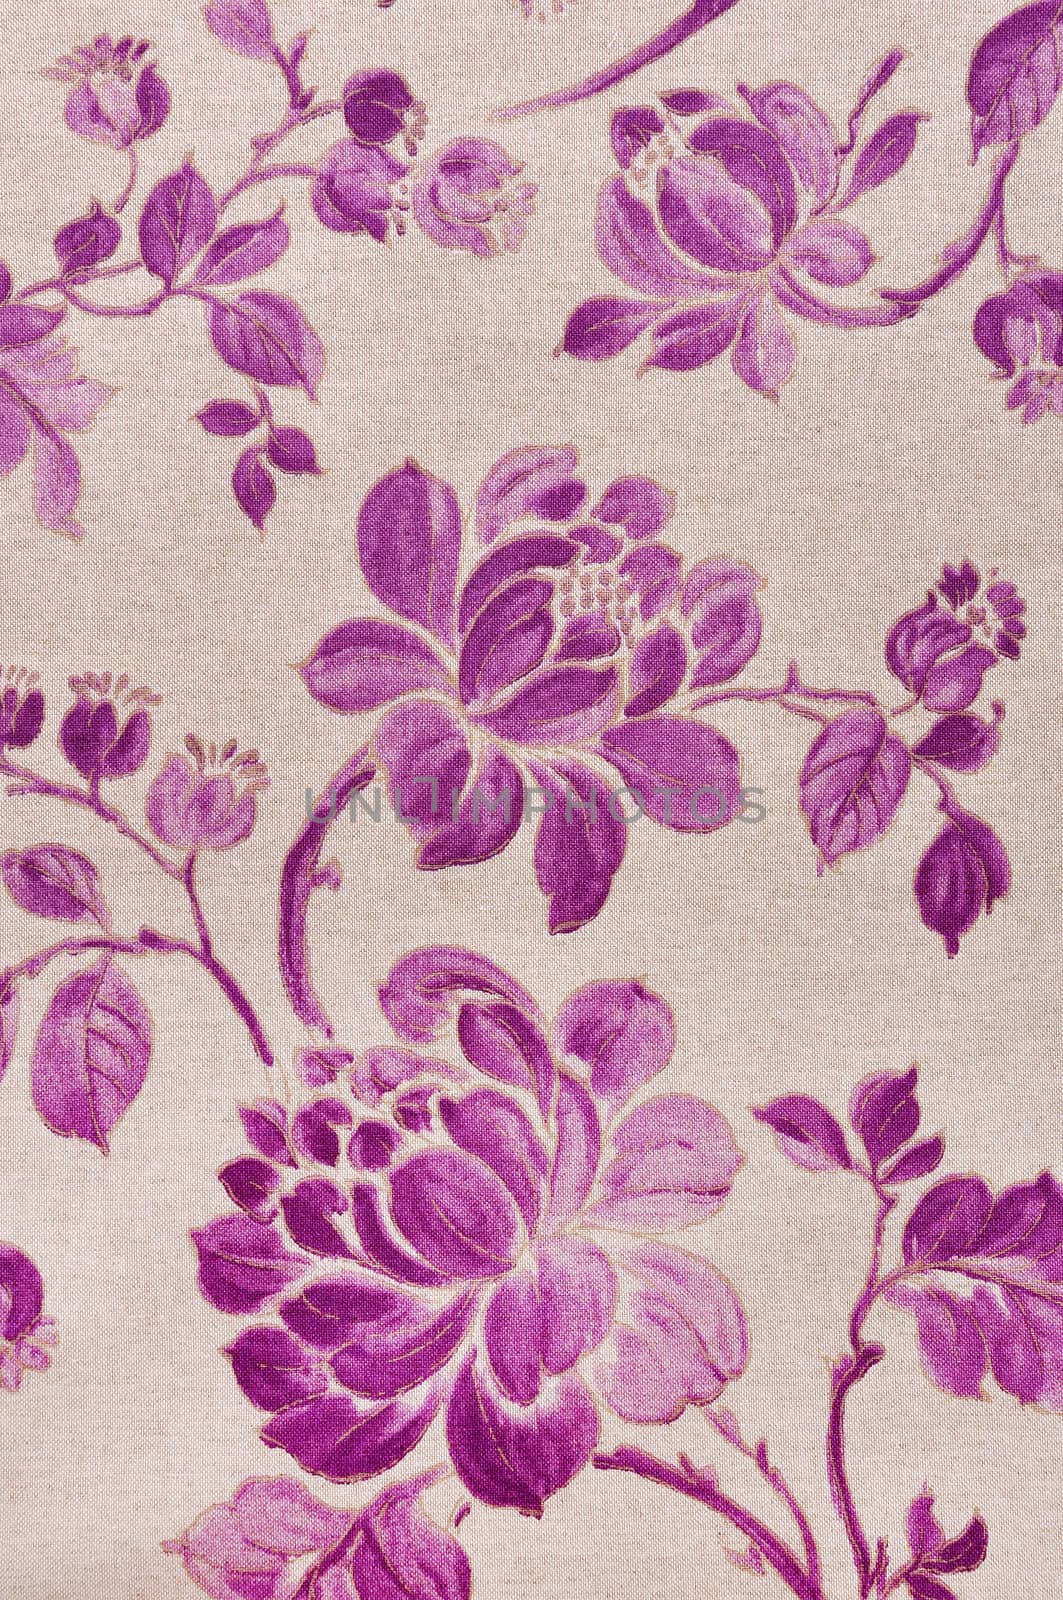 flowers on fabric by vetkit